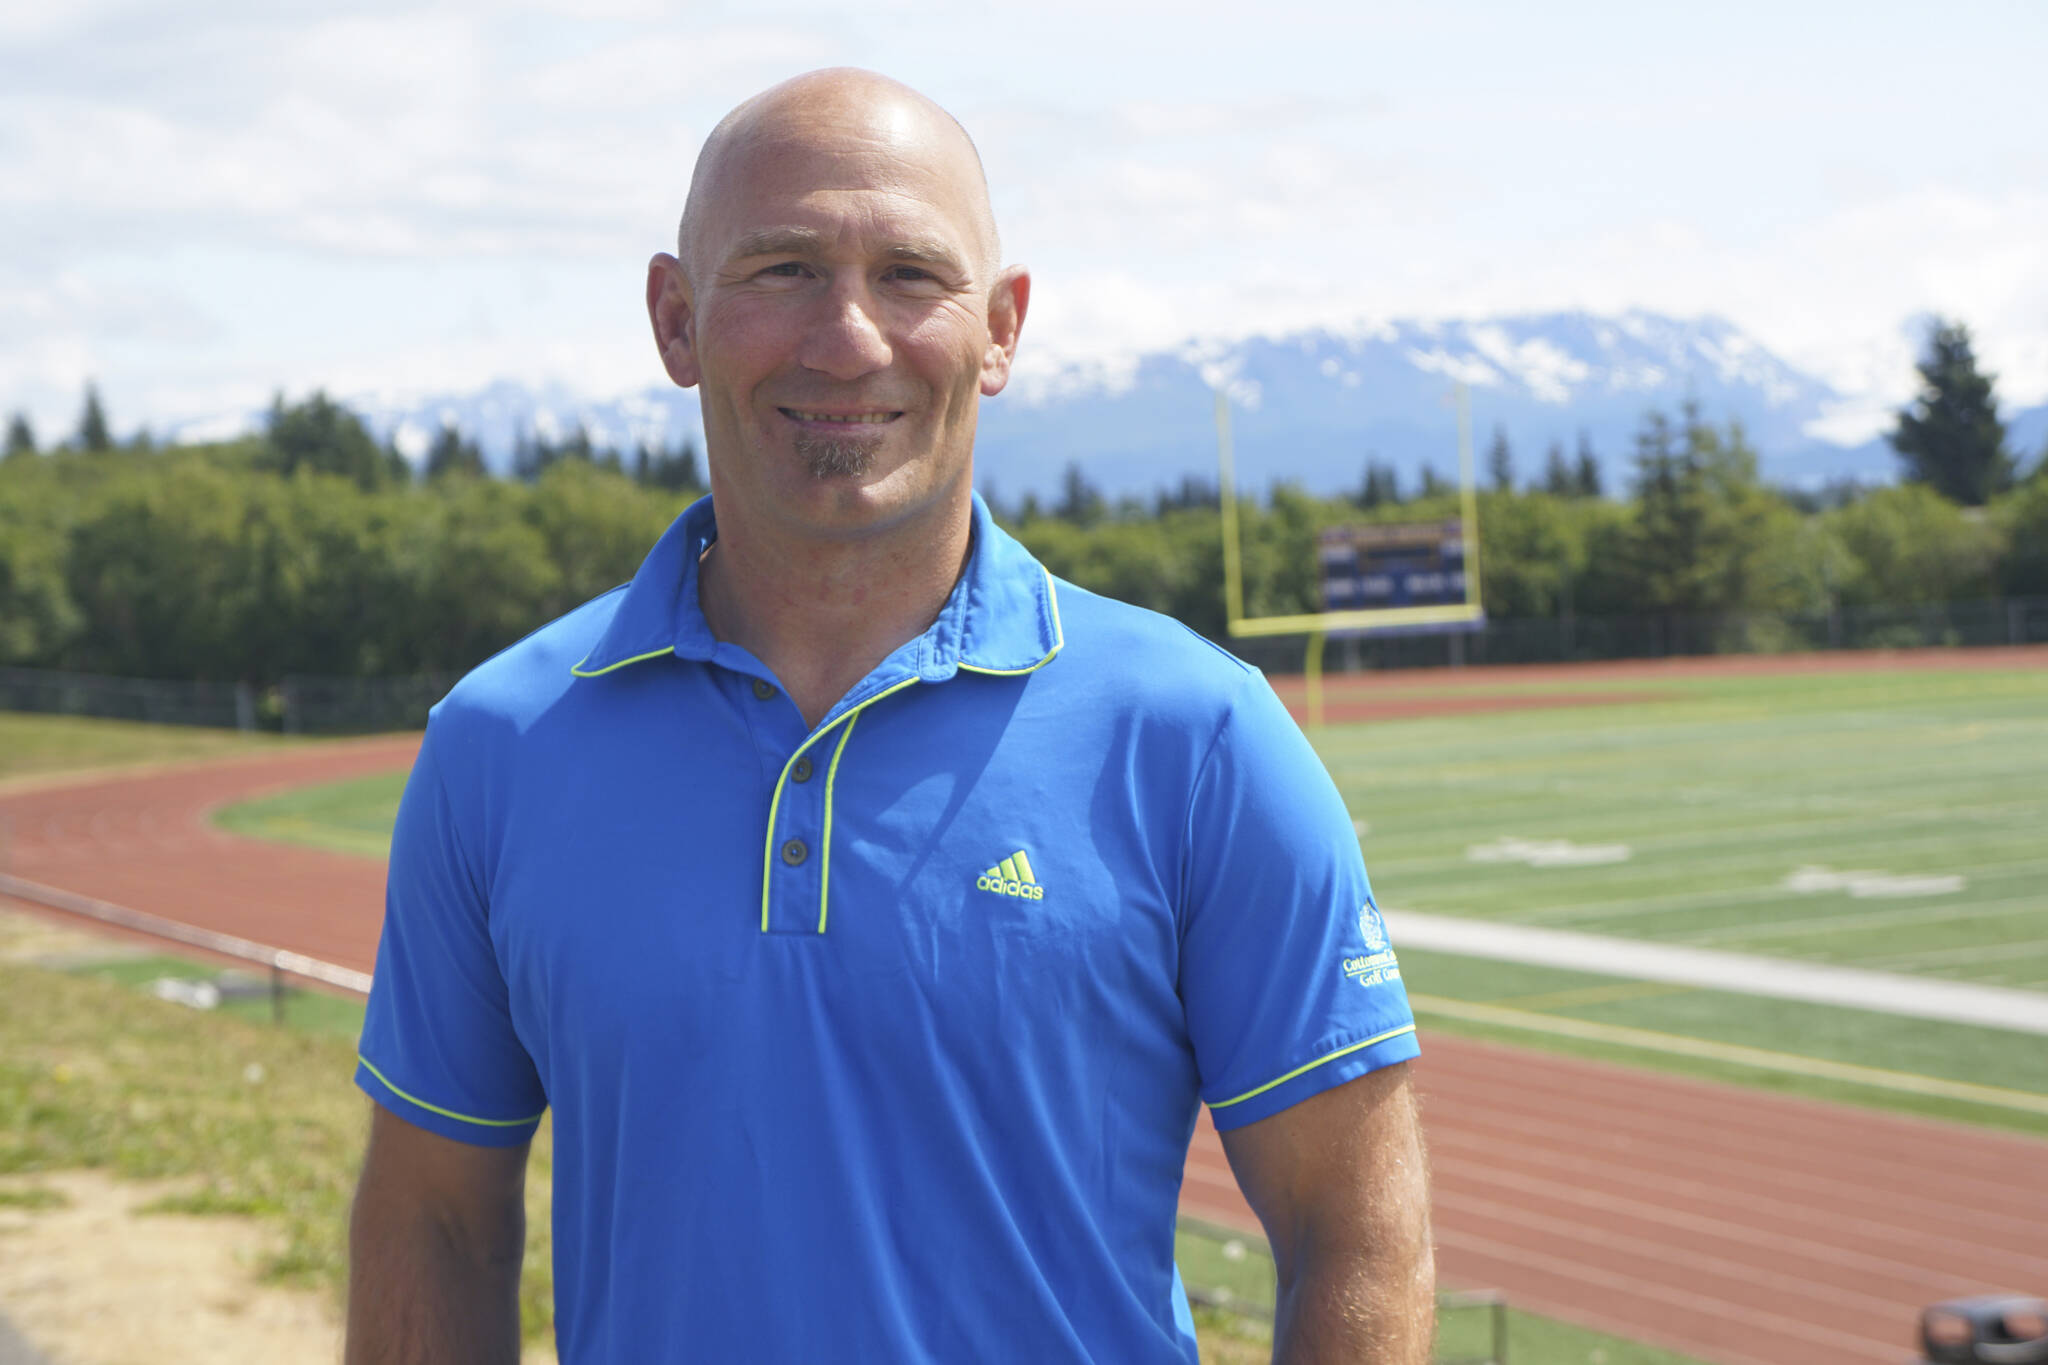 Former Homer High School Athletic Director poses on Friday, July 1, 2022, at the high school athletic field in Homer, Alaska. (Photo by Michael Armstrong/Homer News)